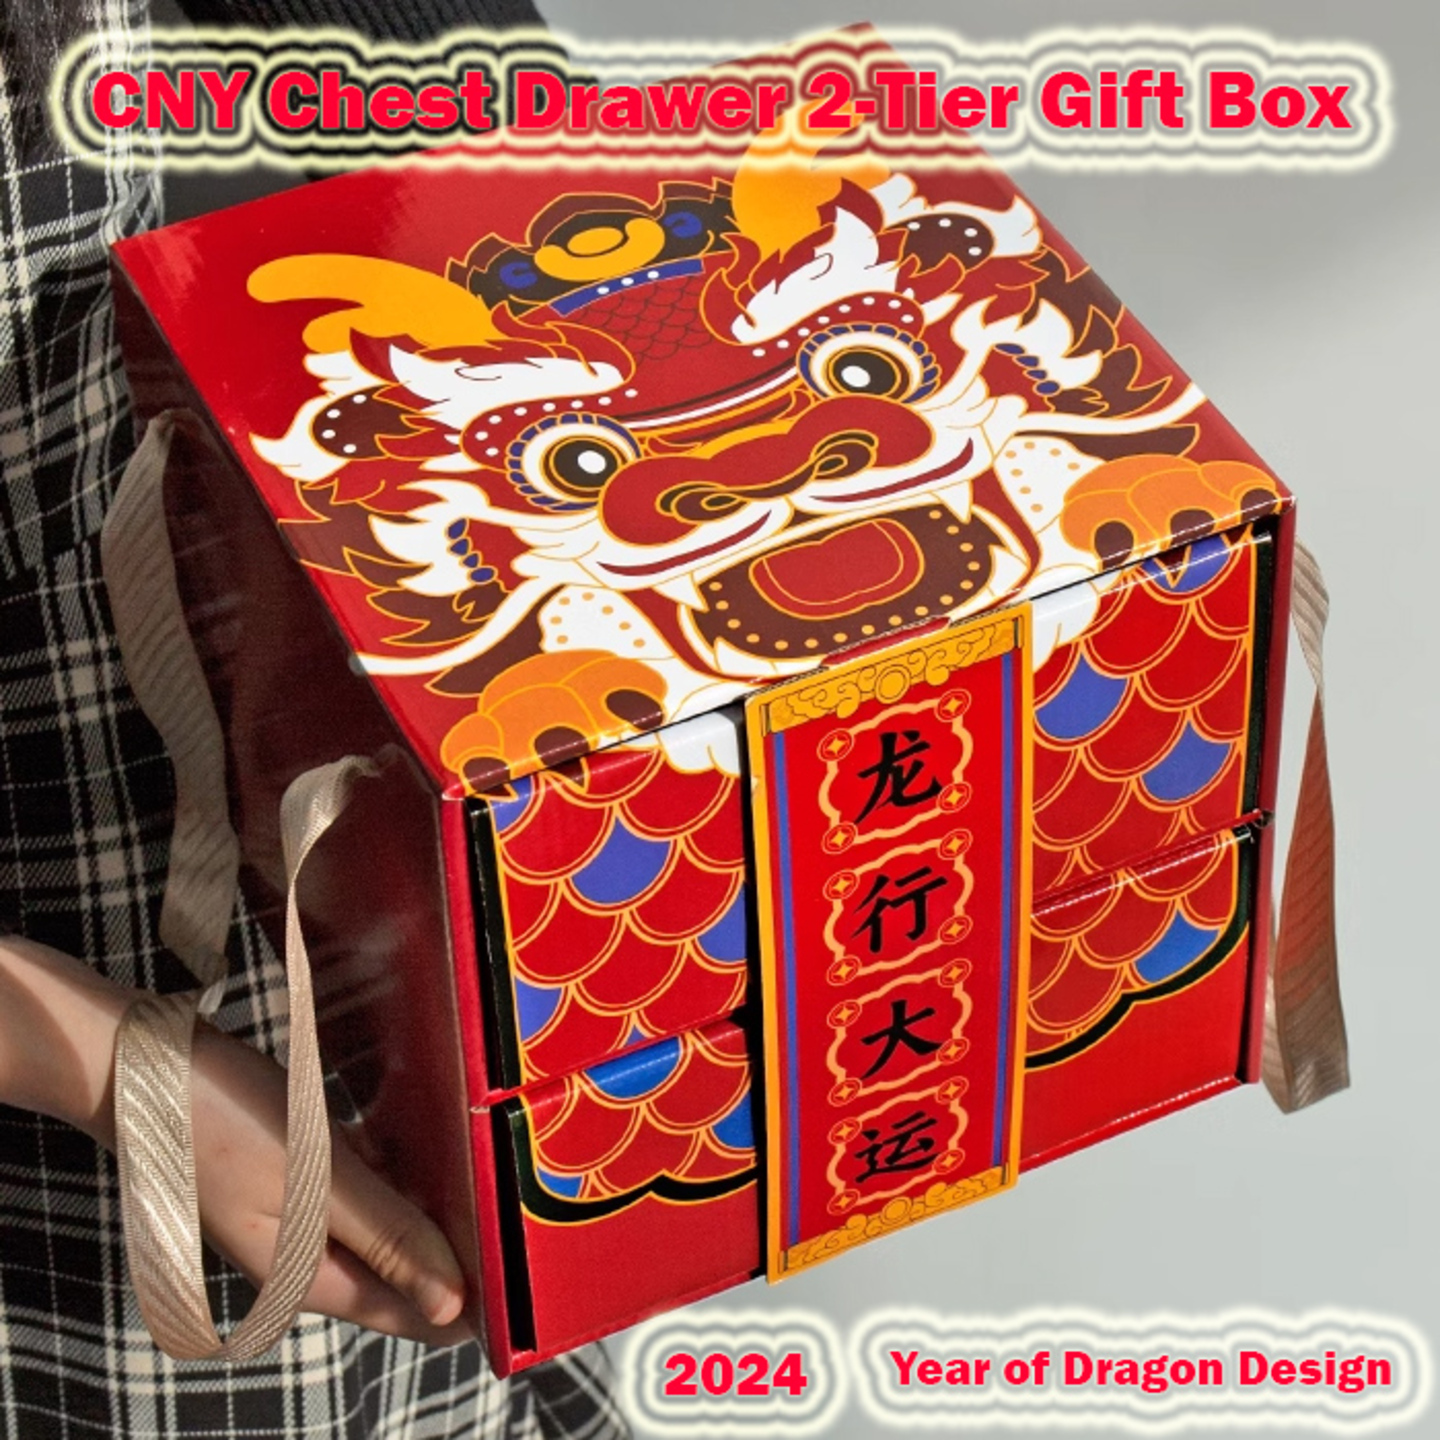 EARLY BIRD PROMO with FREE Gift Set, Pre-order before 5th Jan 2024 2024 CNY Super Premium Gift Box - Year of Dragon 2024 Chest Drawer Box 8 Bottles with Gift Box